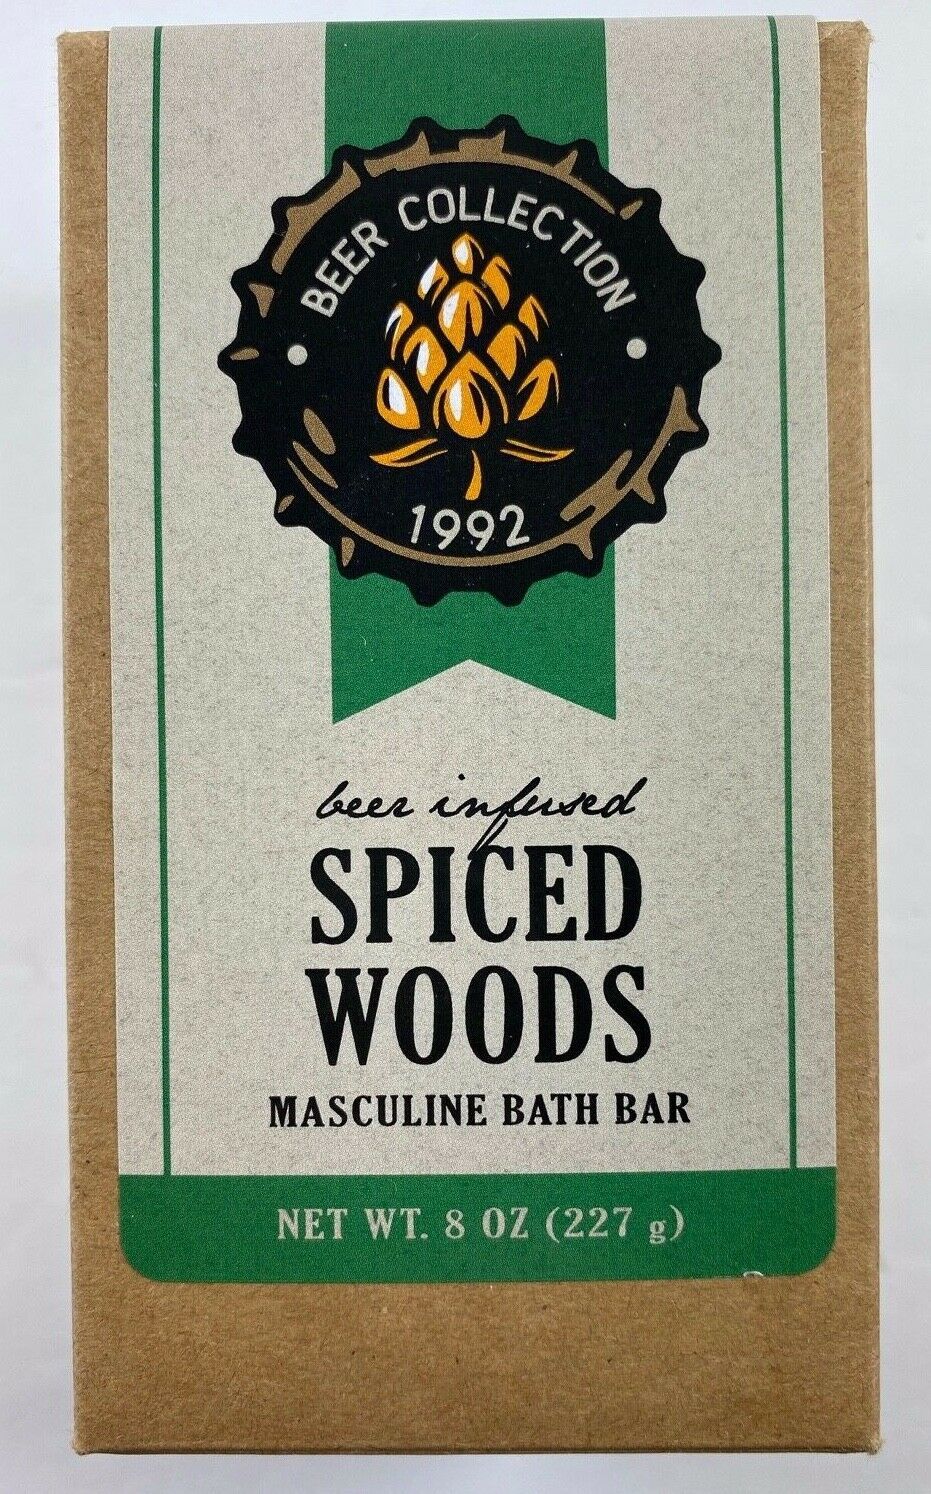 Mens Beer Collection 1992 Infused Spiced Woods Masculine Bath Bar 8 oz - $13.85